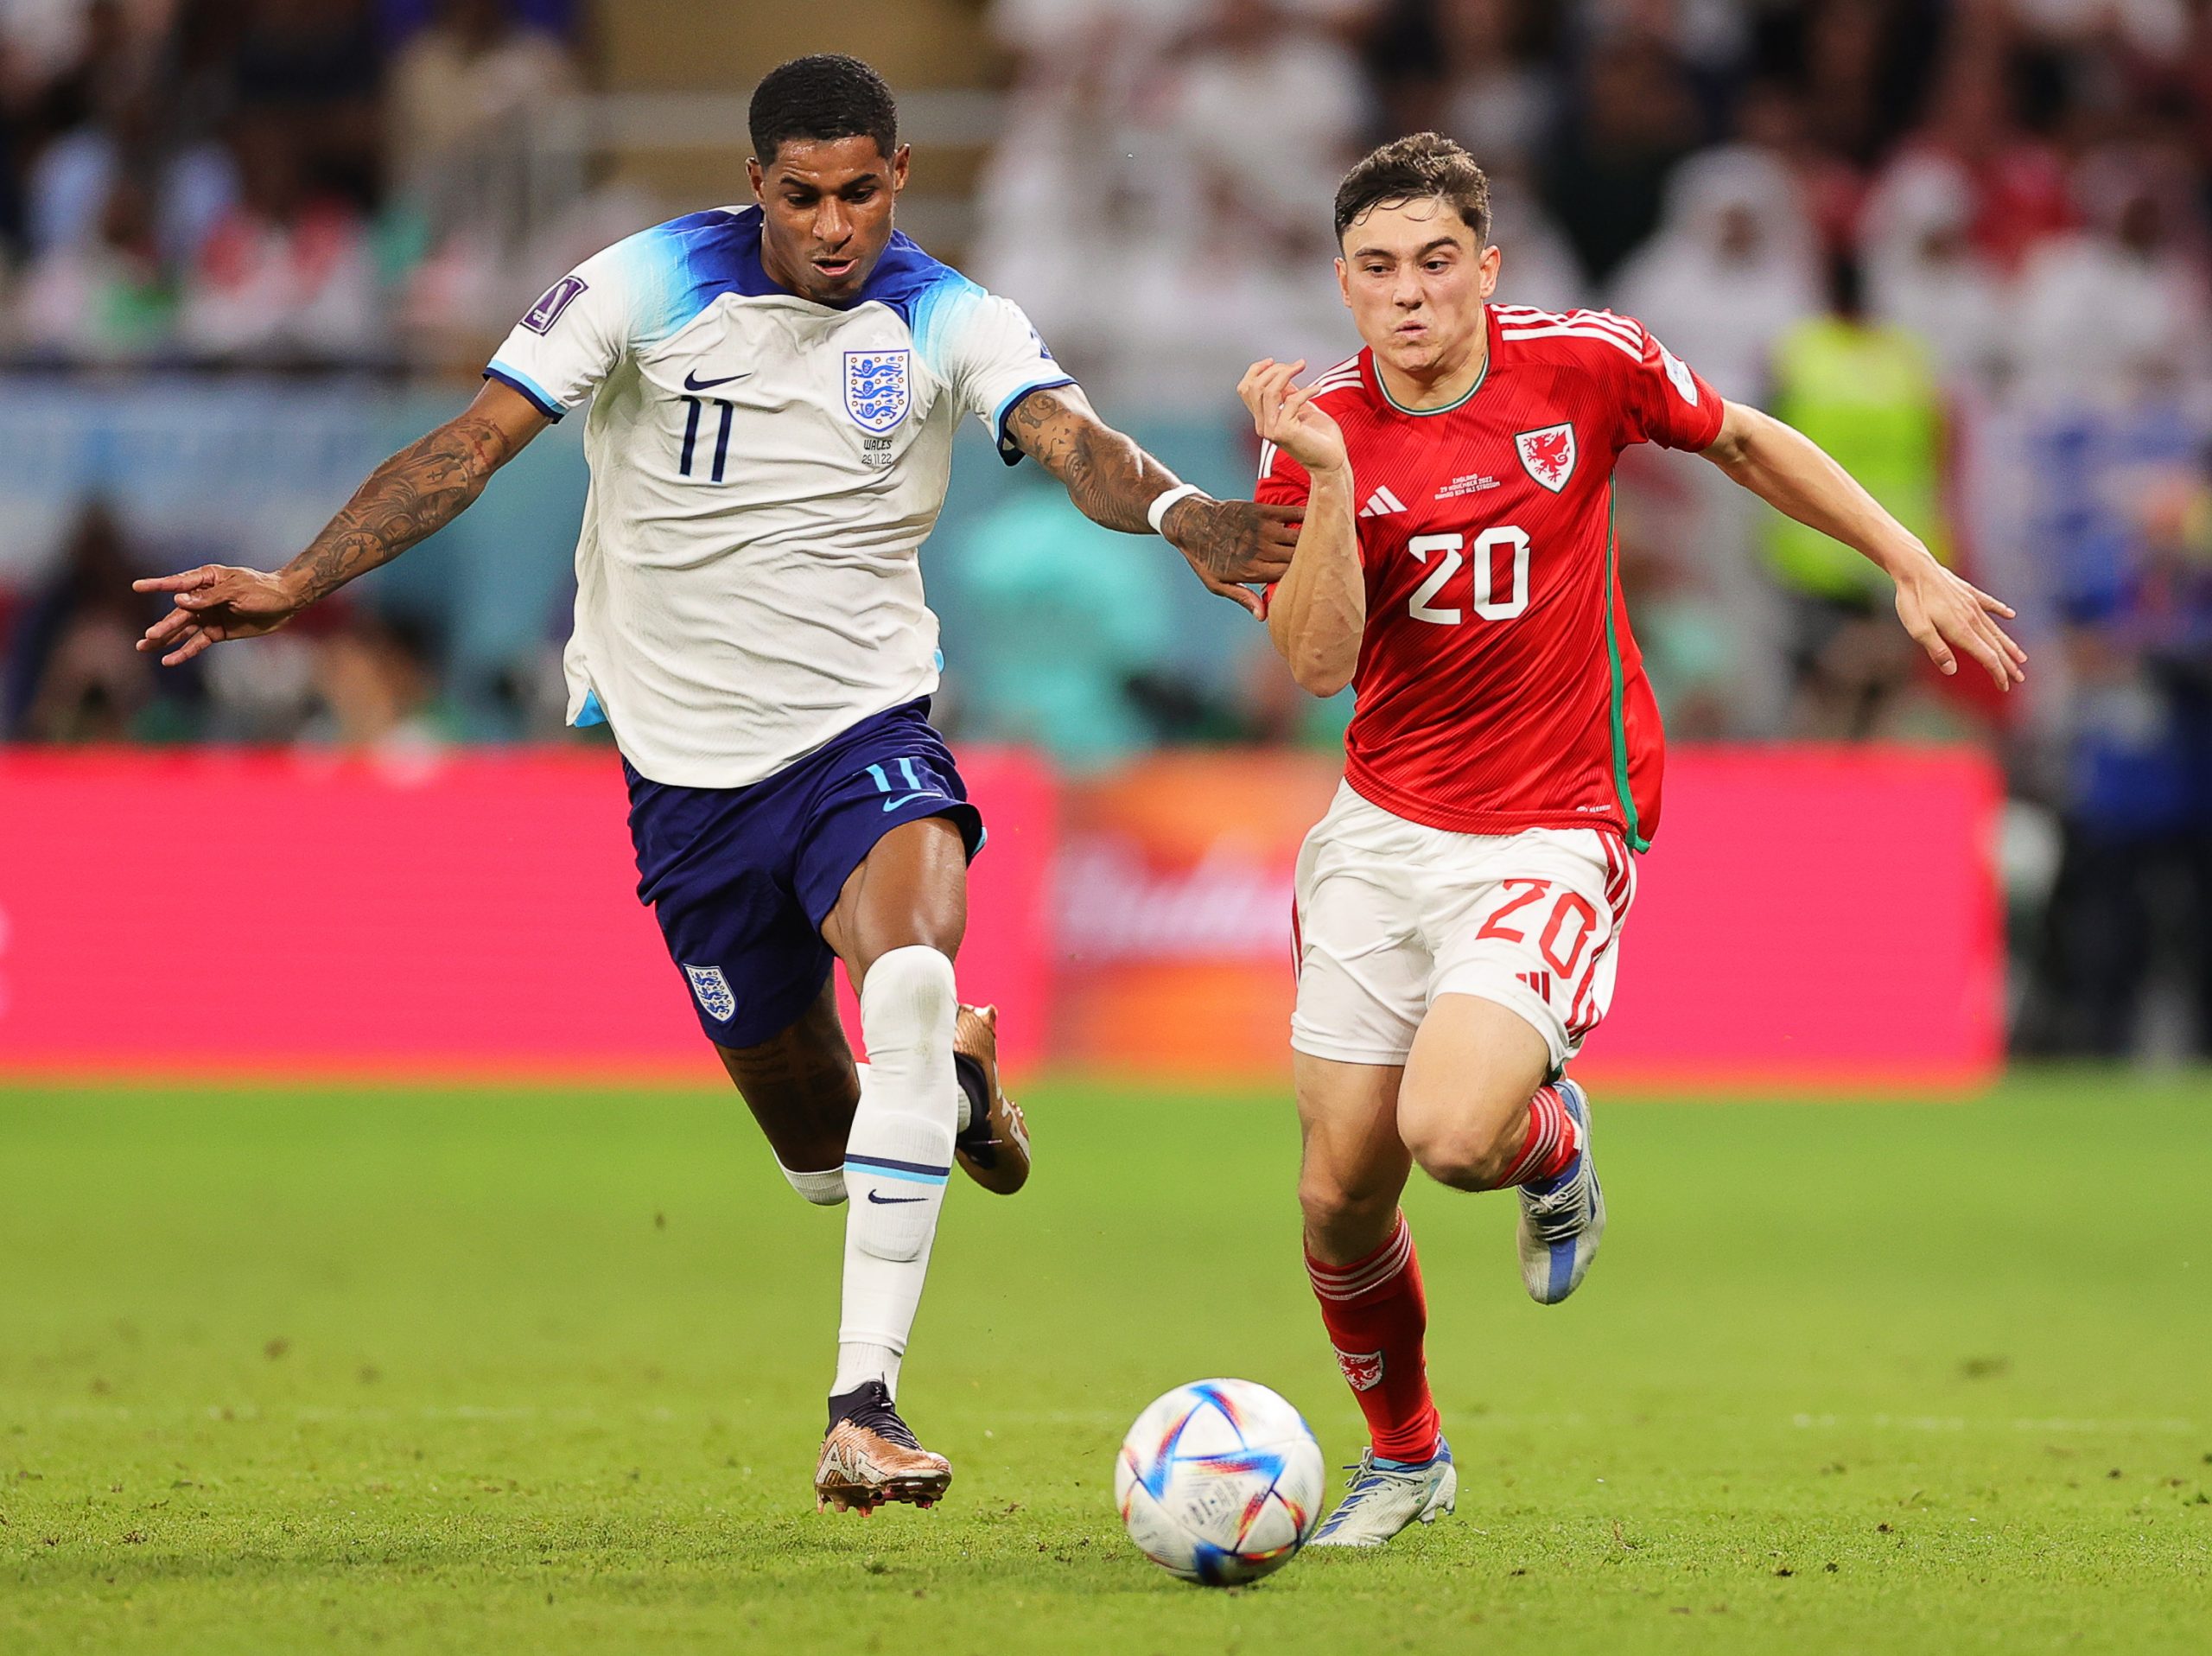 epa10337410 Marcus Rashford (L) of England in action against Daniel James (R) of Wales during the FIFA World Cup 2022 group B soccer match between Wales and England at Ahmad bin Ali Stadium in Doha, Qatar, 29 November 2022.  EPA/Friedemann Vogel